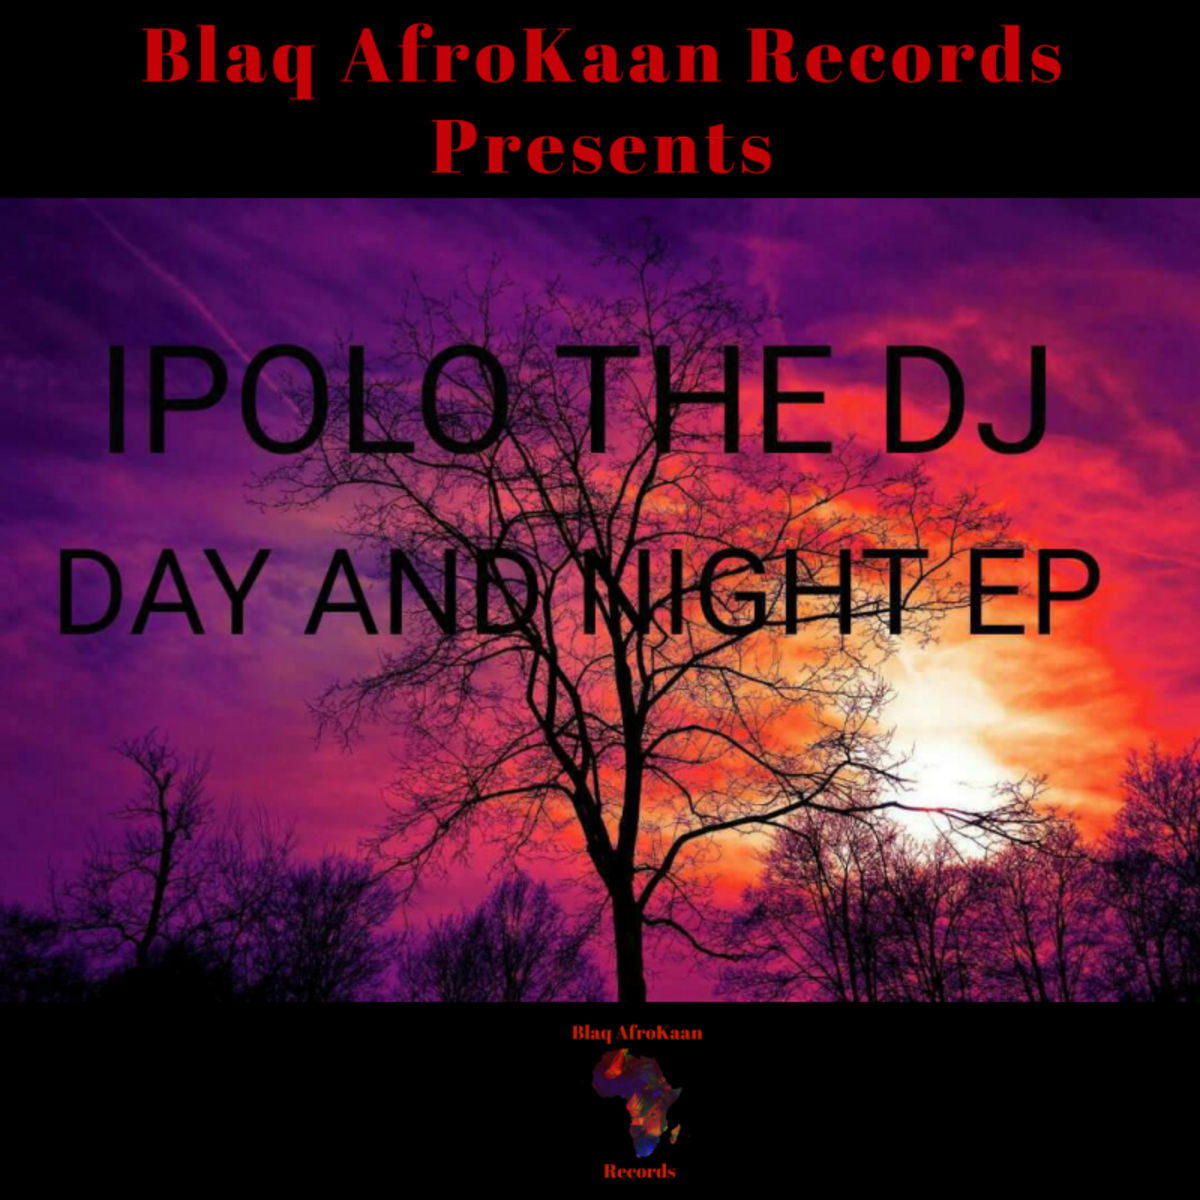 IPOLO THE DJ - Day And Night(EP) / BlaqAfroKaan Records